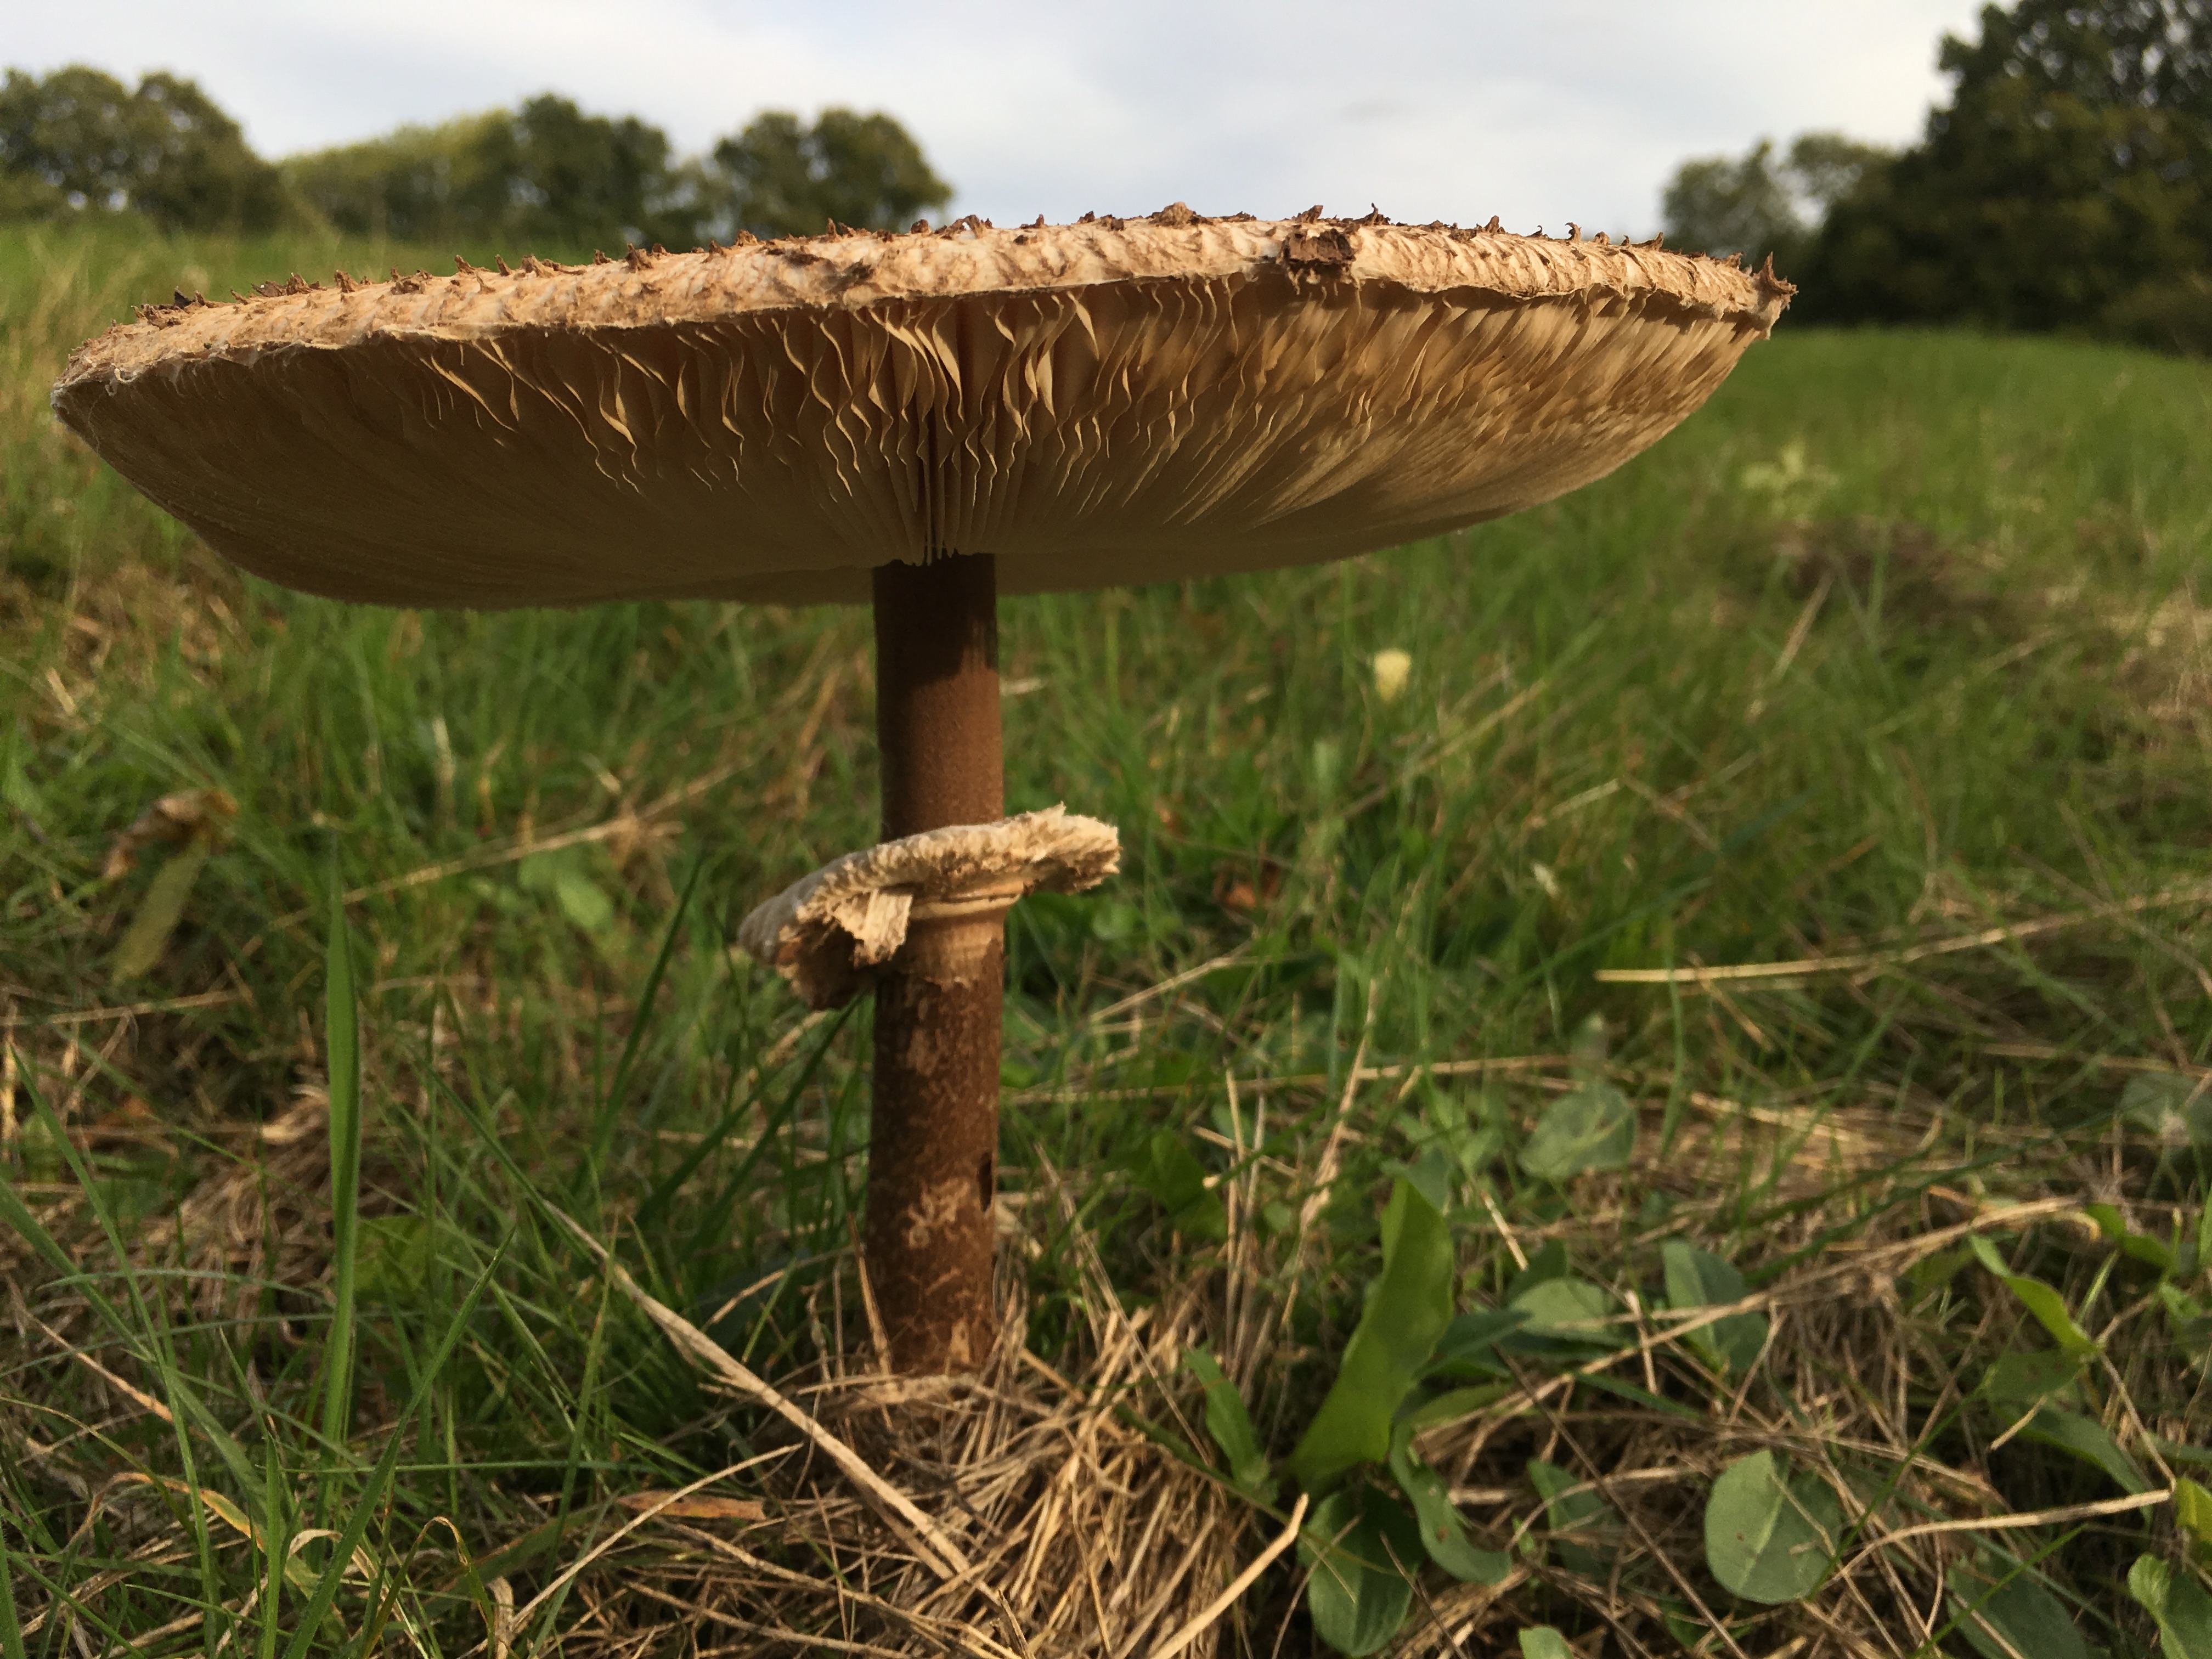 photograph of a mushroom in a field